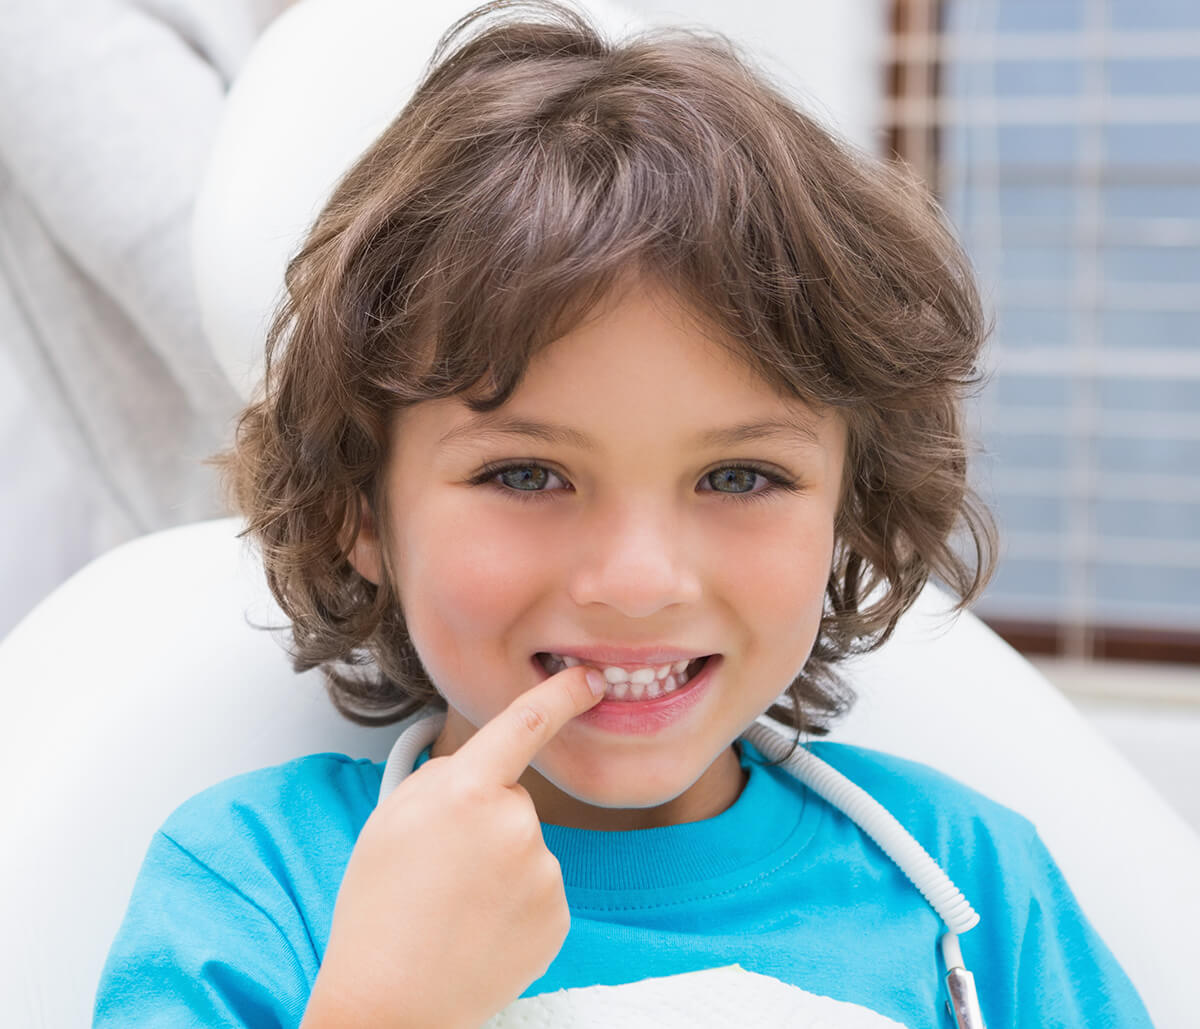 Dentistry Services for Children in Houston Area